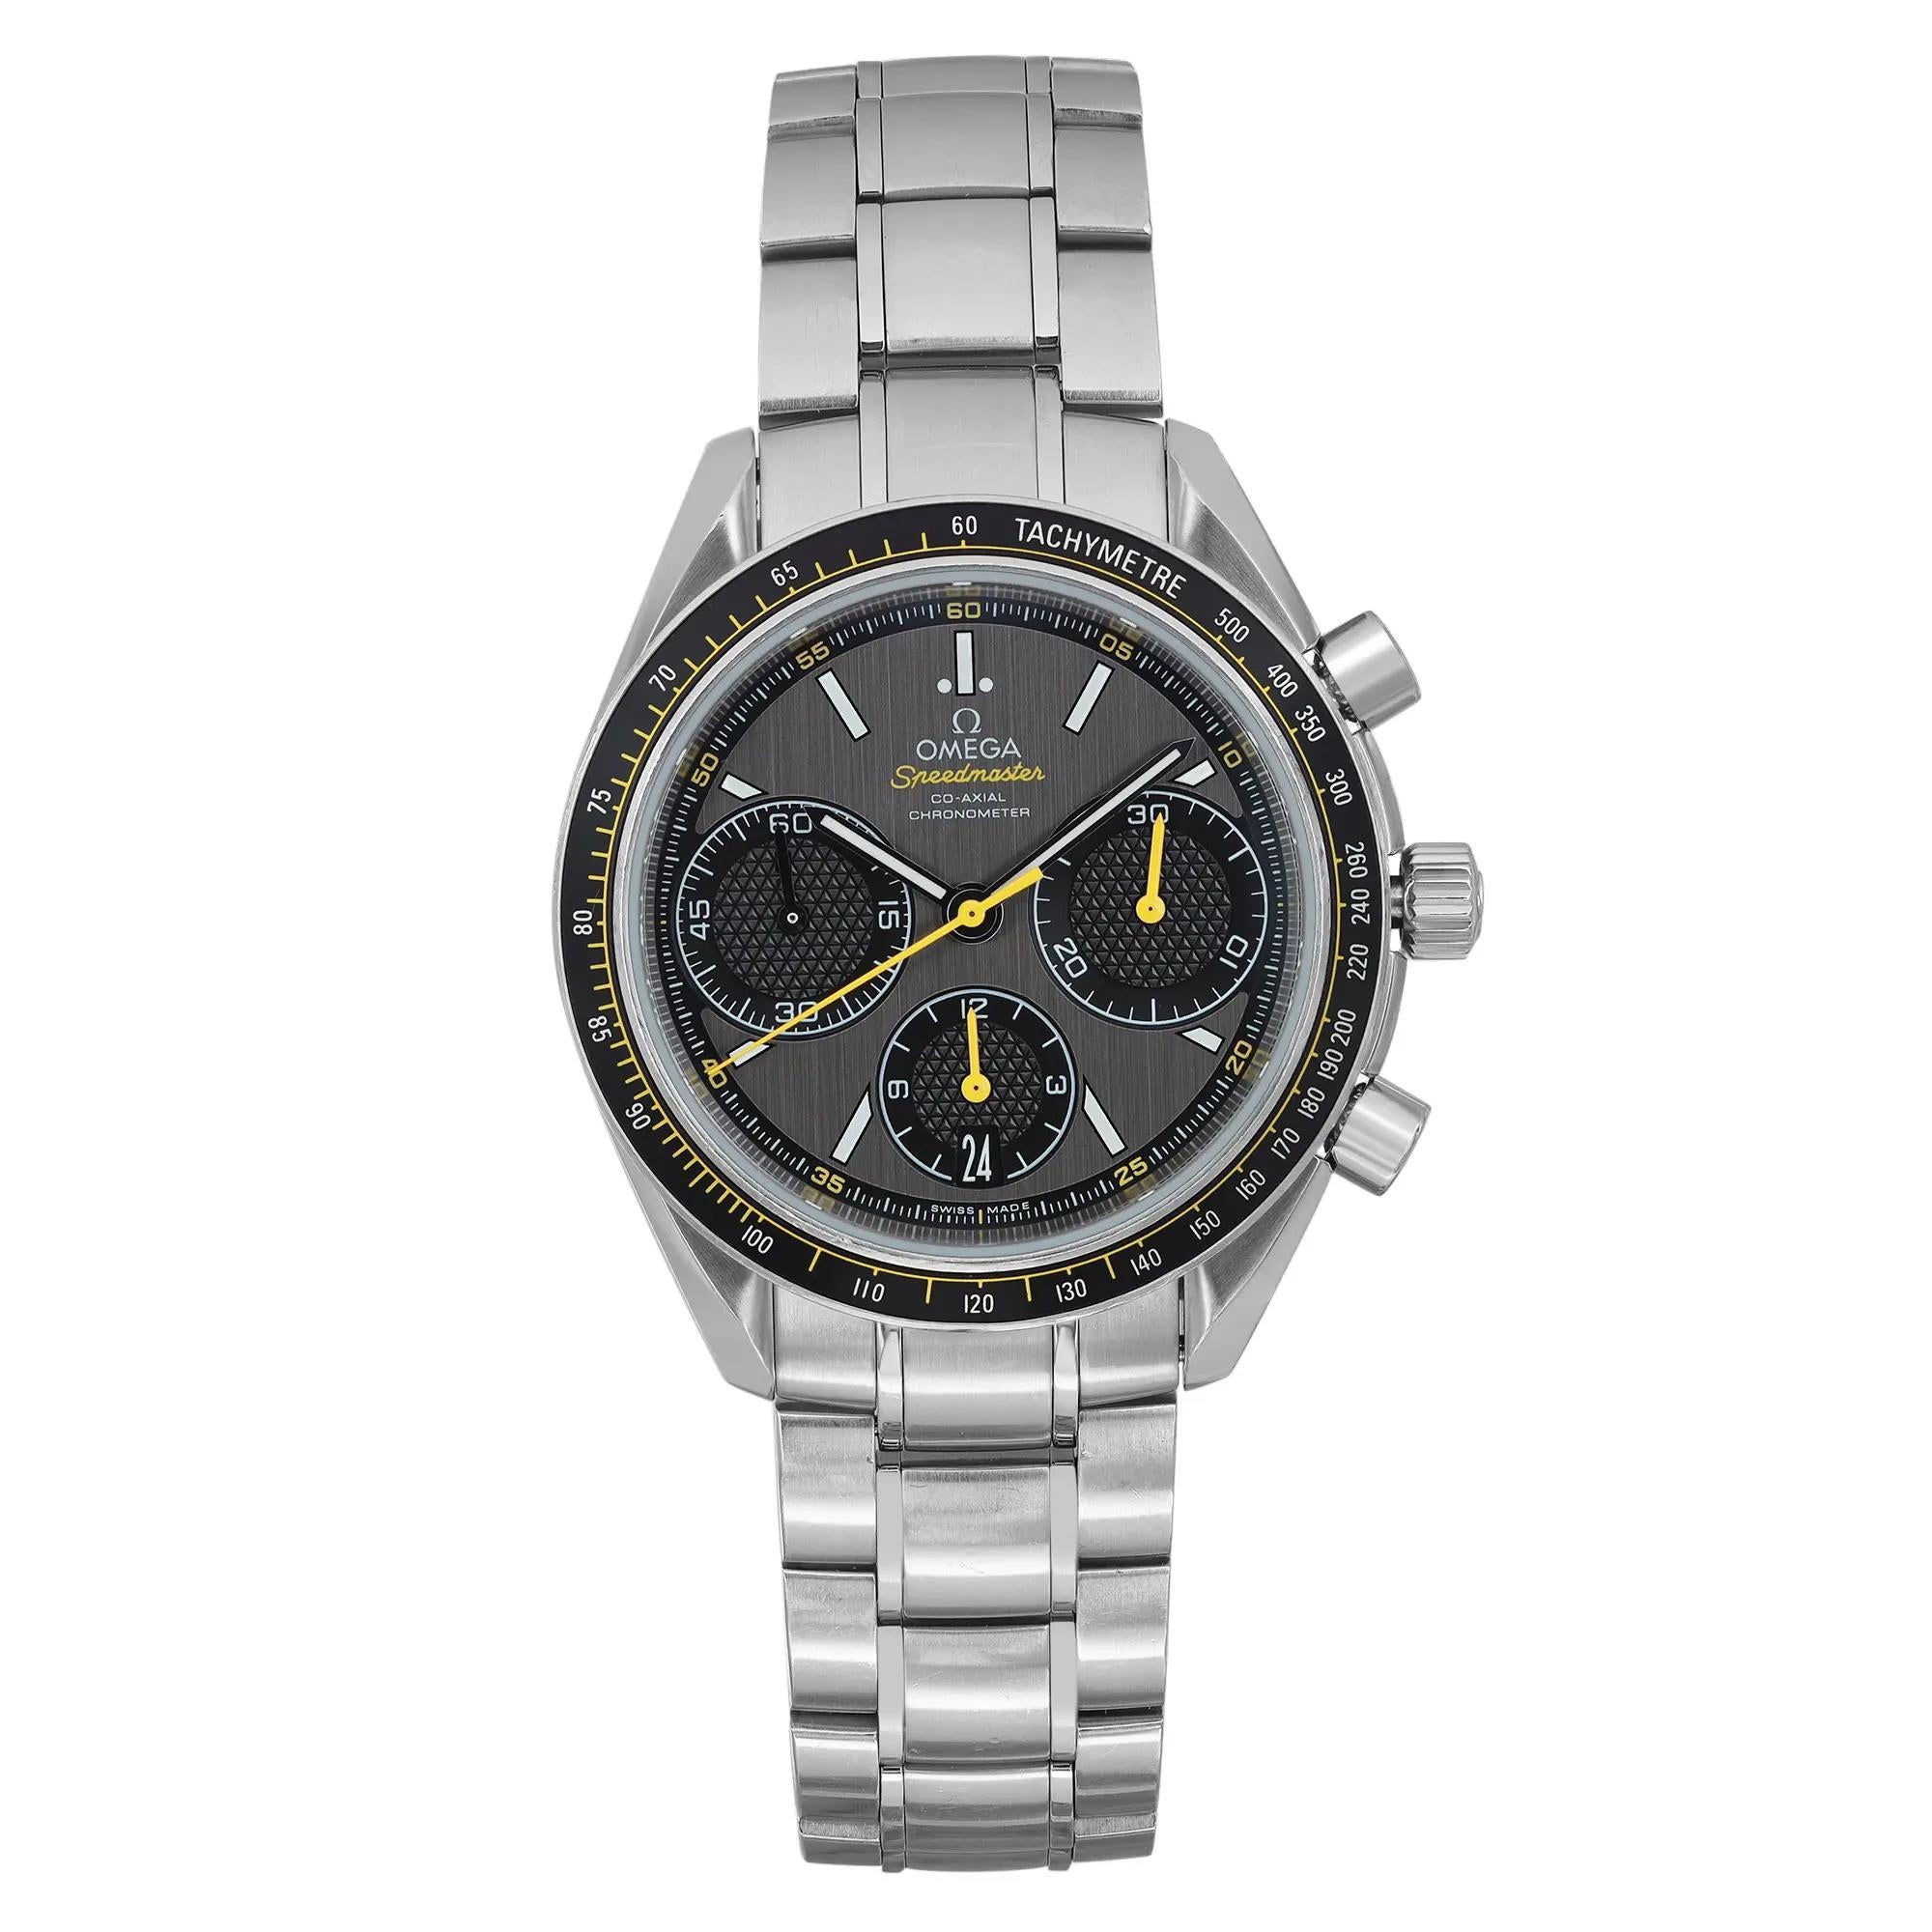 Does the Speedmaster hold value?